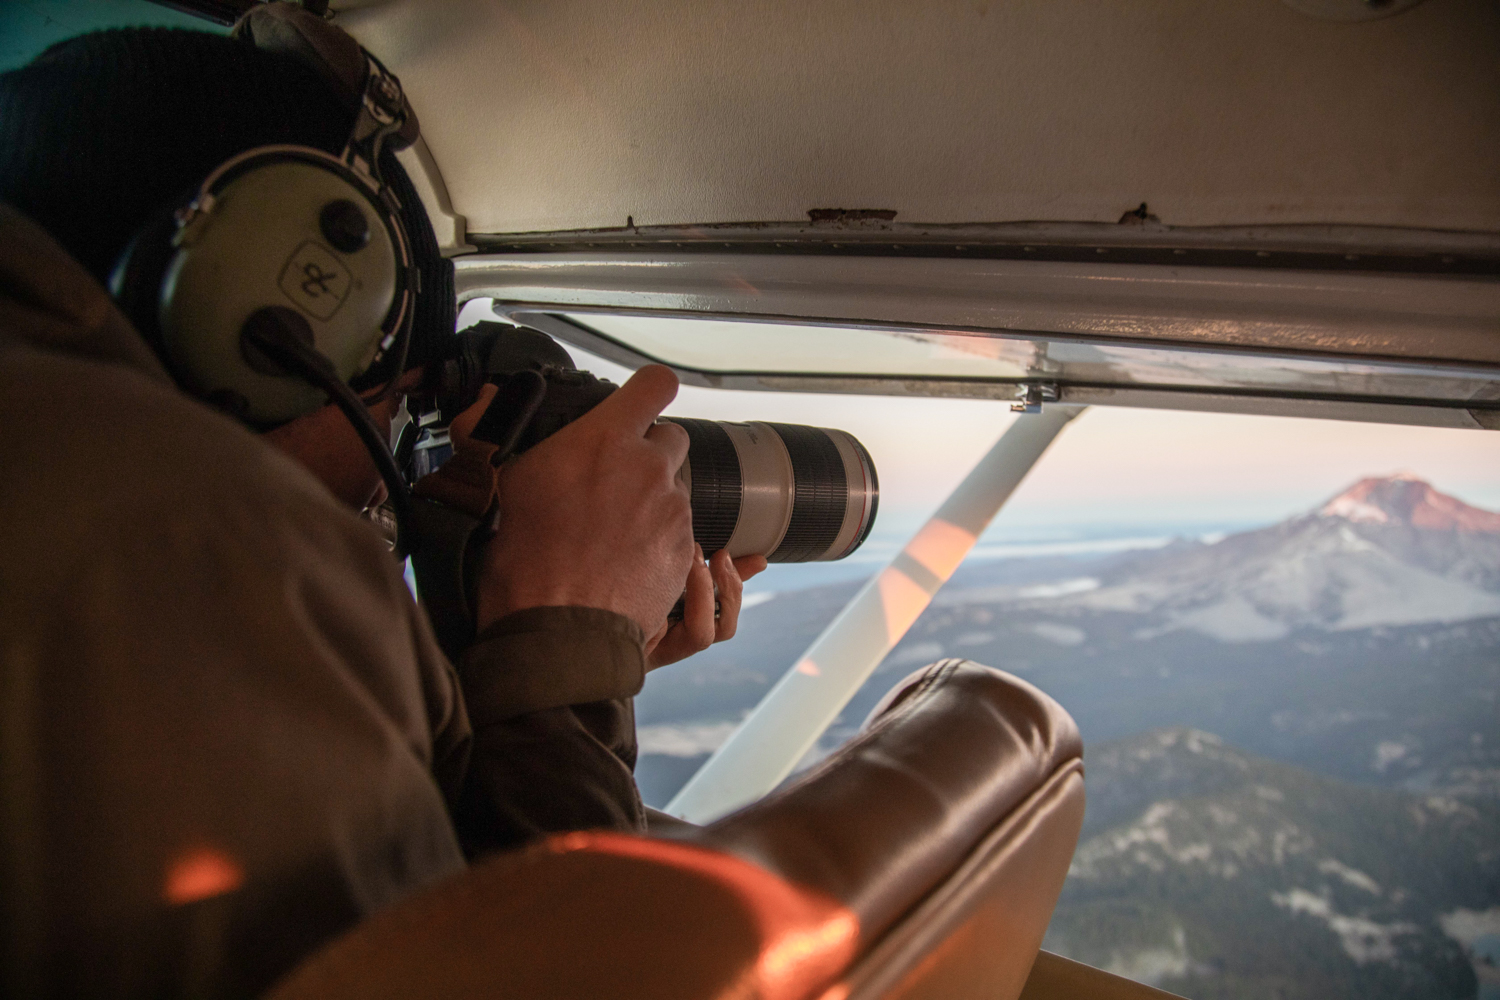 Behind the scenes of aerial photographer Andrew Studer in a small airplane photographing a mountain landscape in Oregon